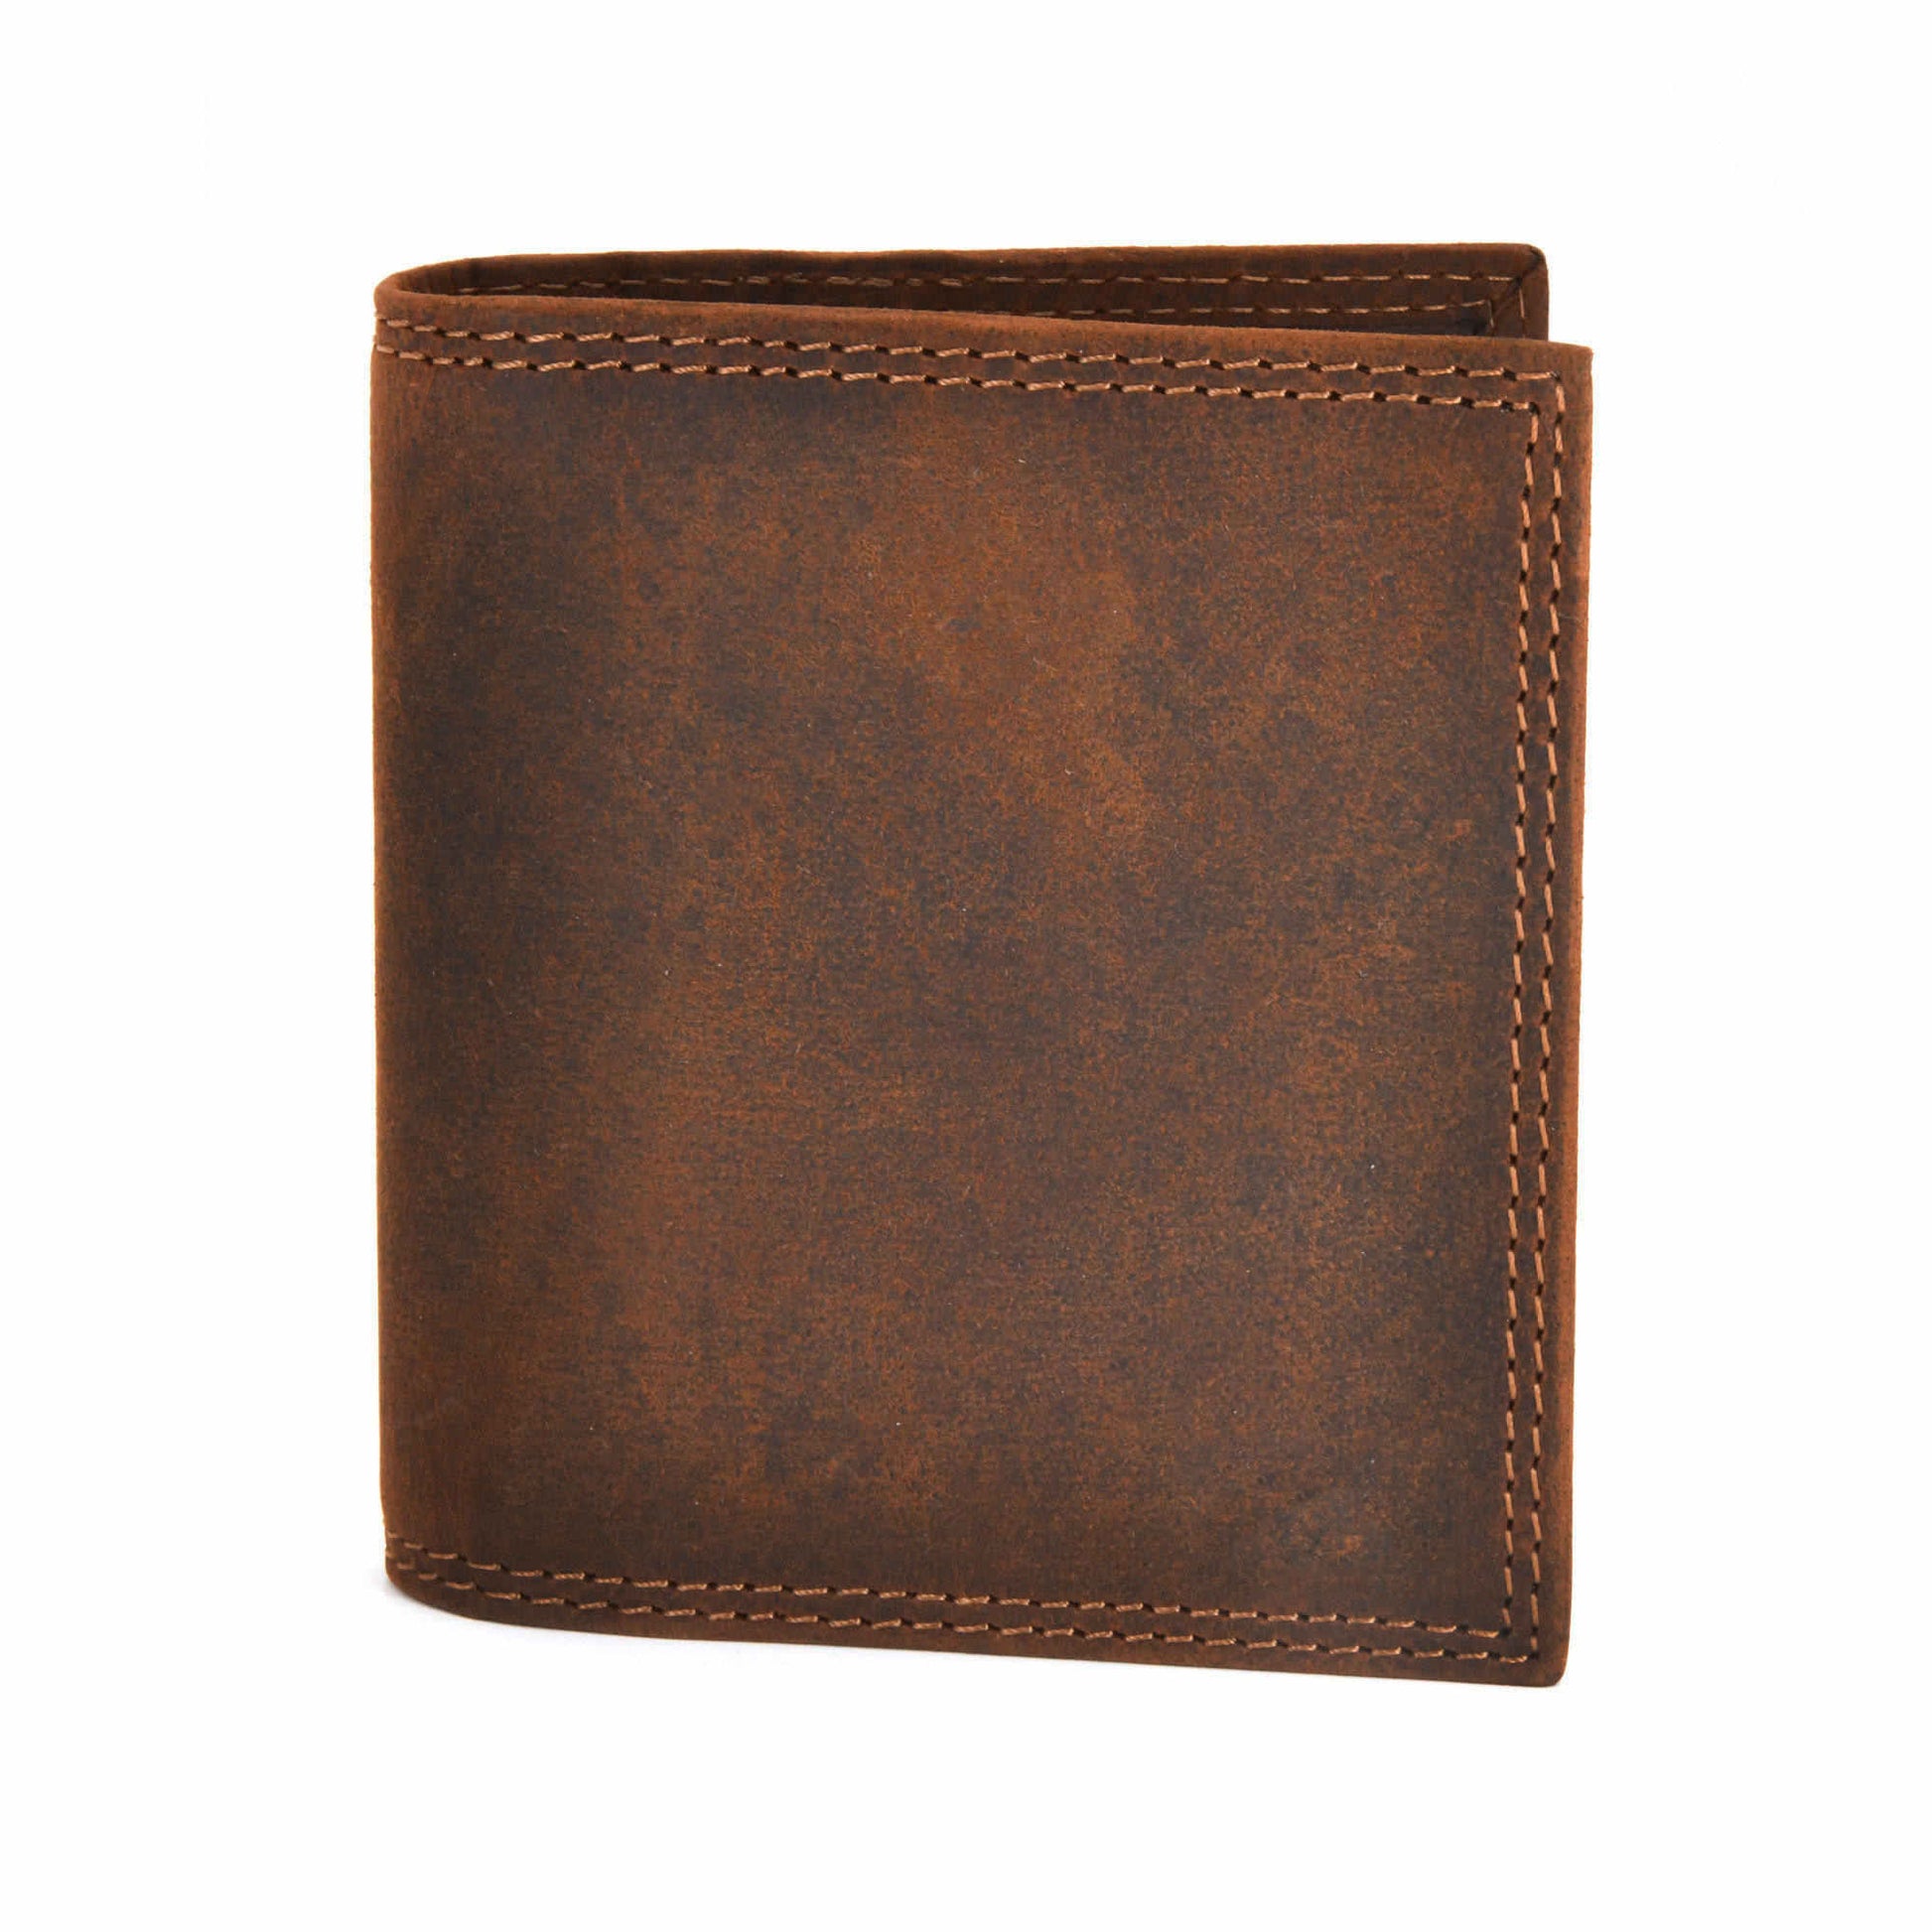 Style n Craft 300703-BR Credit Card / Business Card Case in Brown Leather with Vintage like 2 Tone Effect & Double Stitching on the outside. It has RFID Protection. Closed Front View - Picture of the Wallet in a Lighter Shade